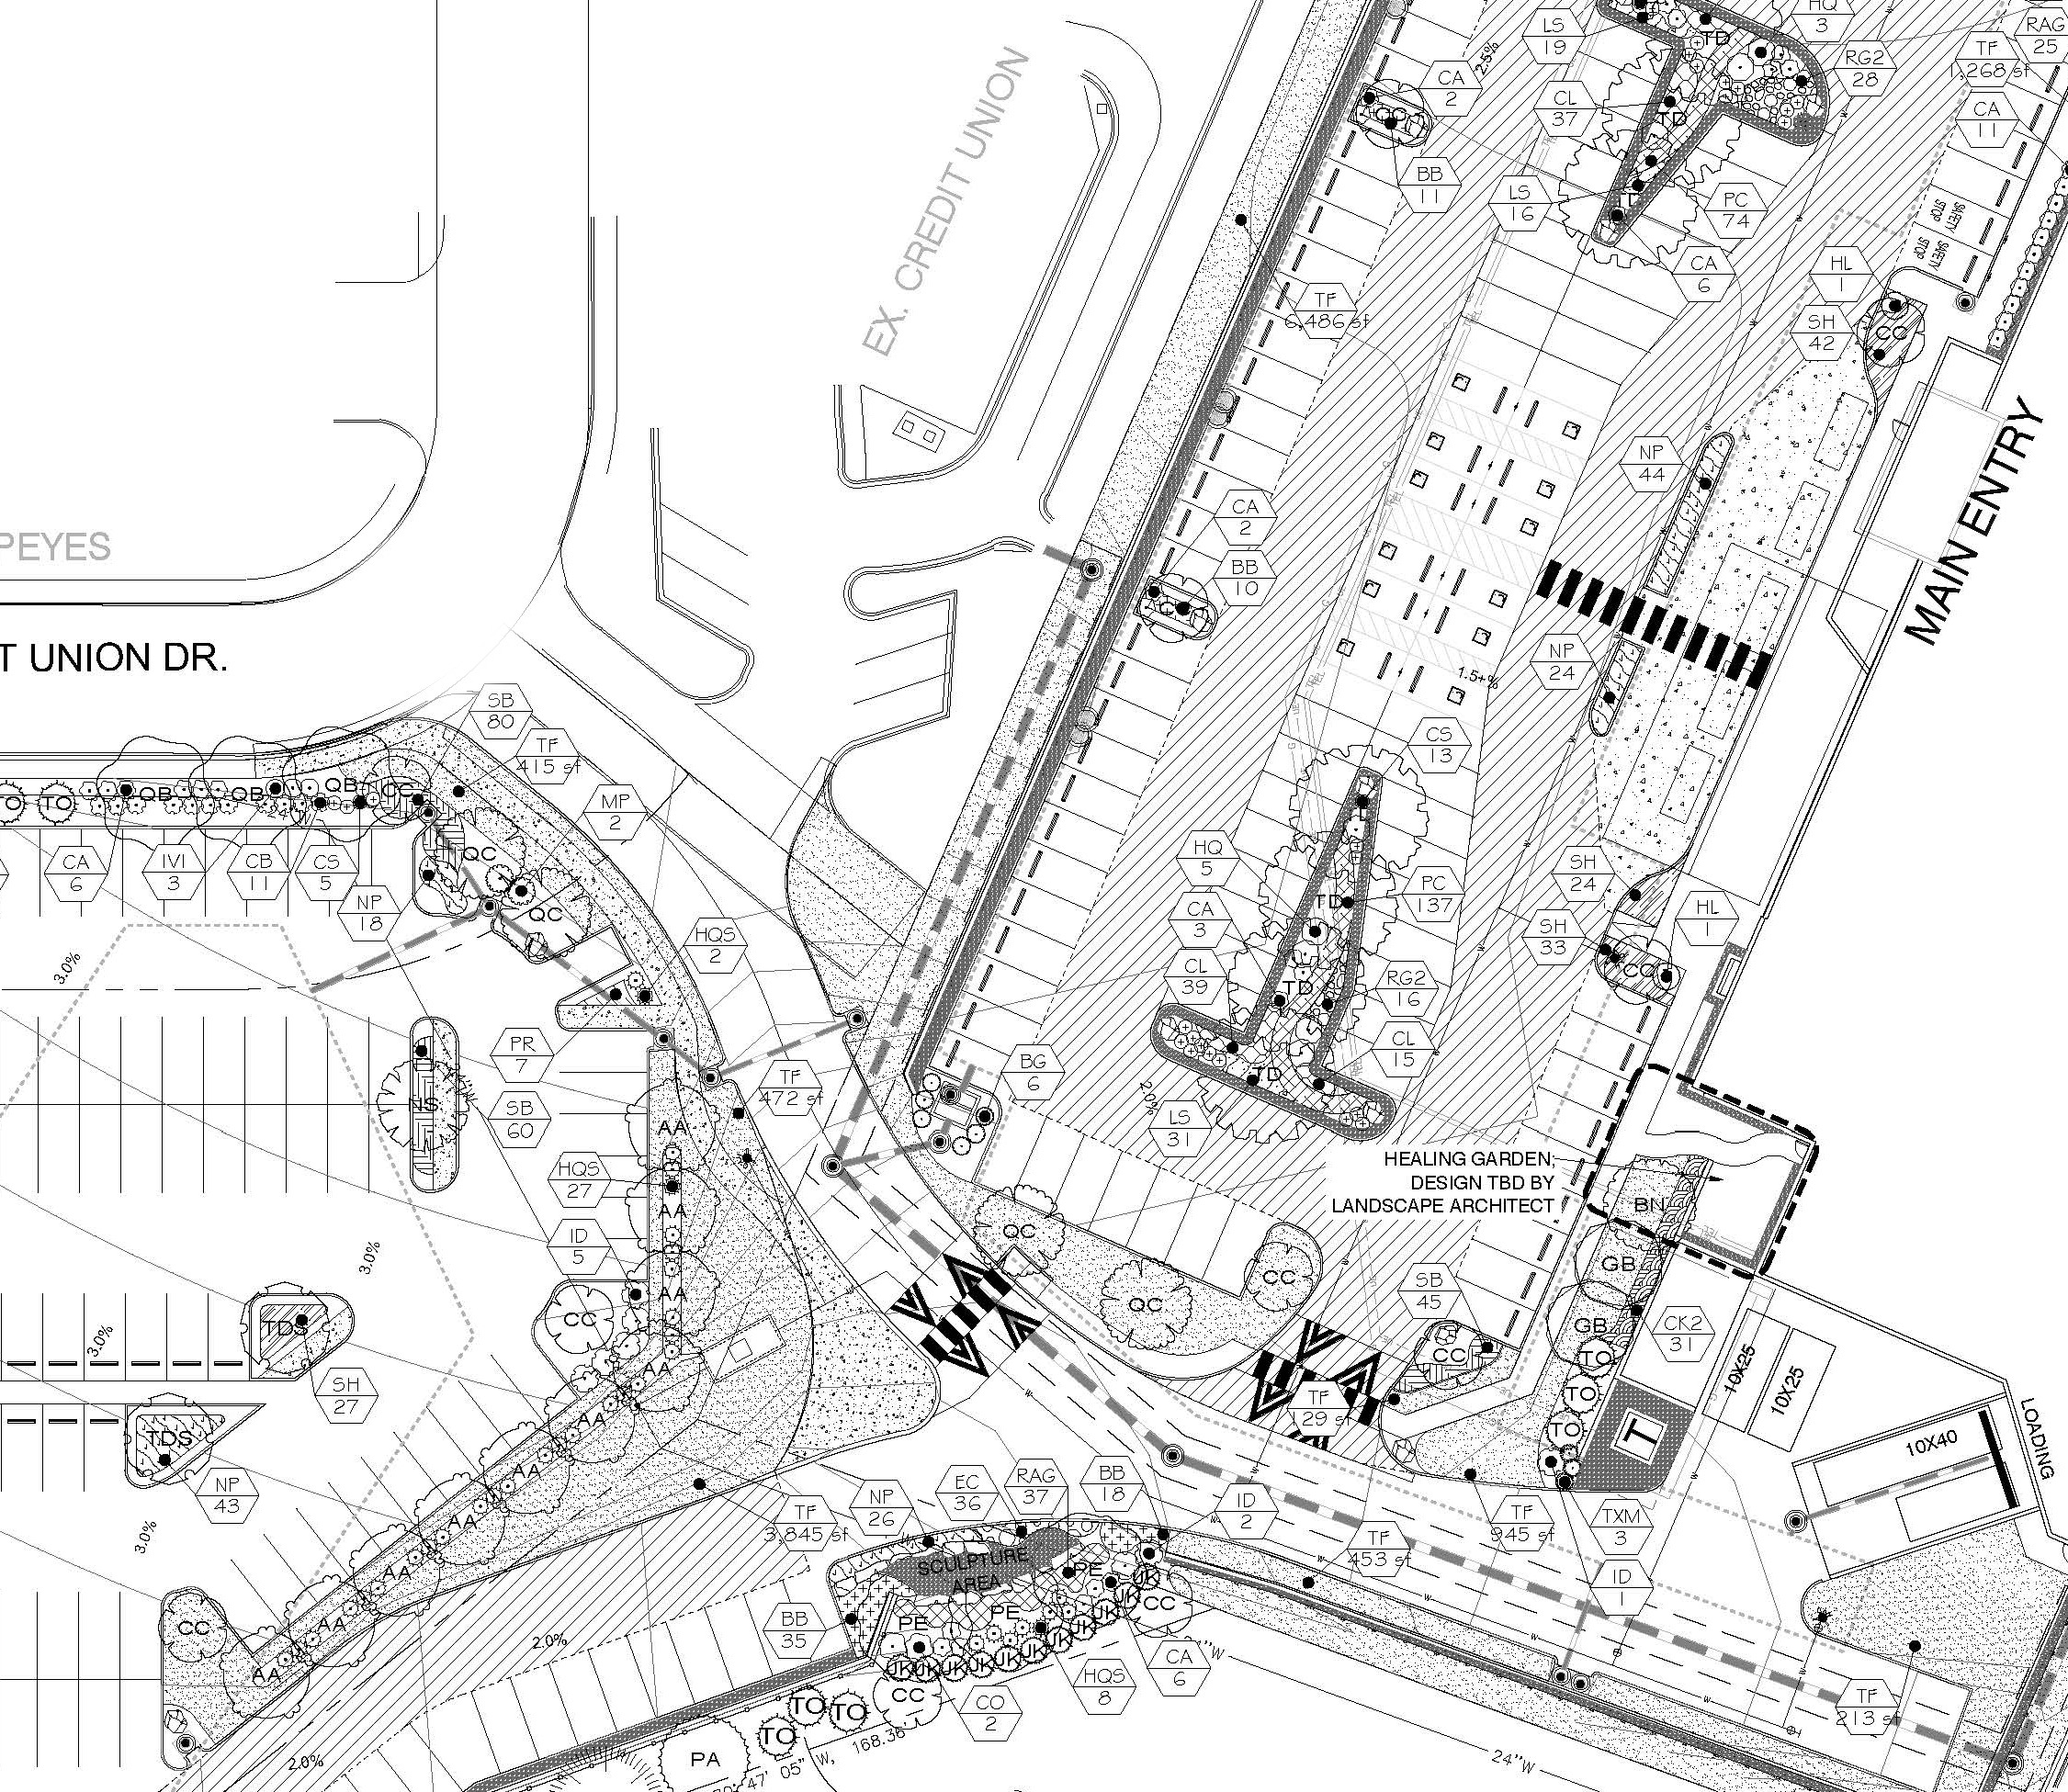 190425 BJC CSCC County Site Plan-LDP.01_not sent to Nick but provided by Kristy